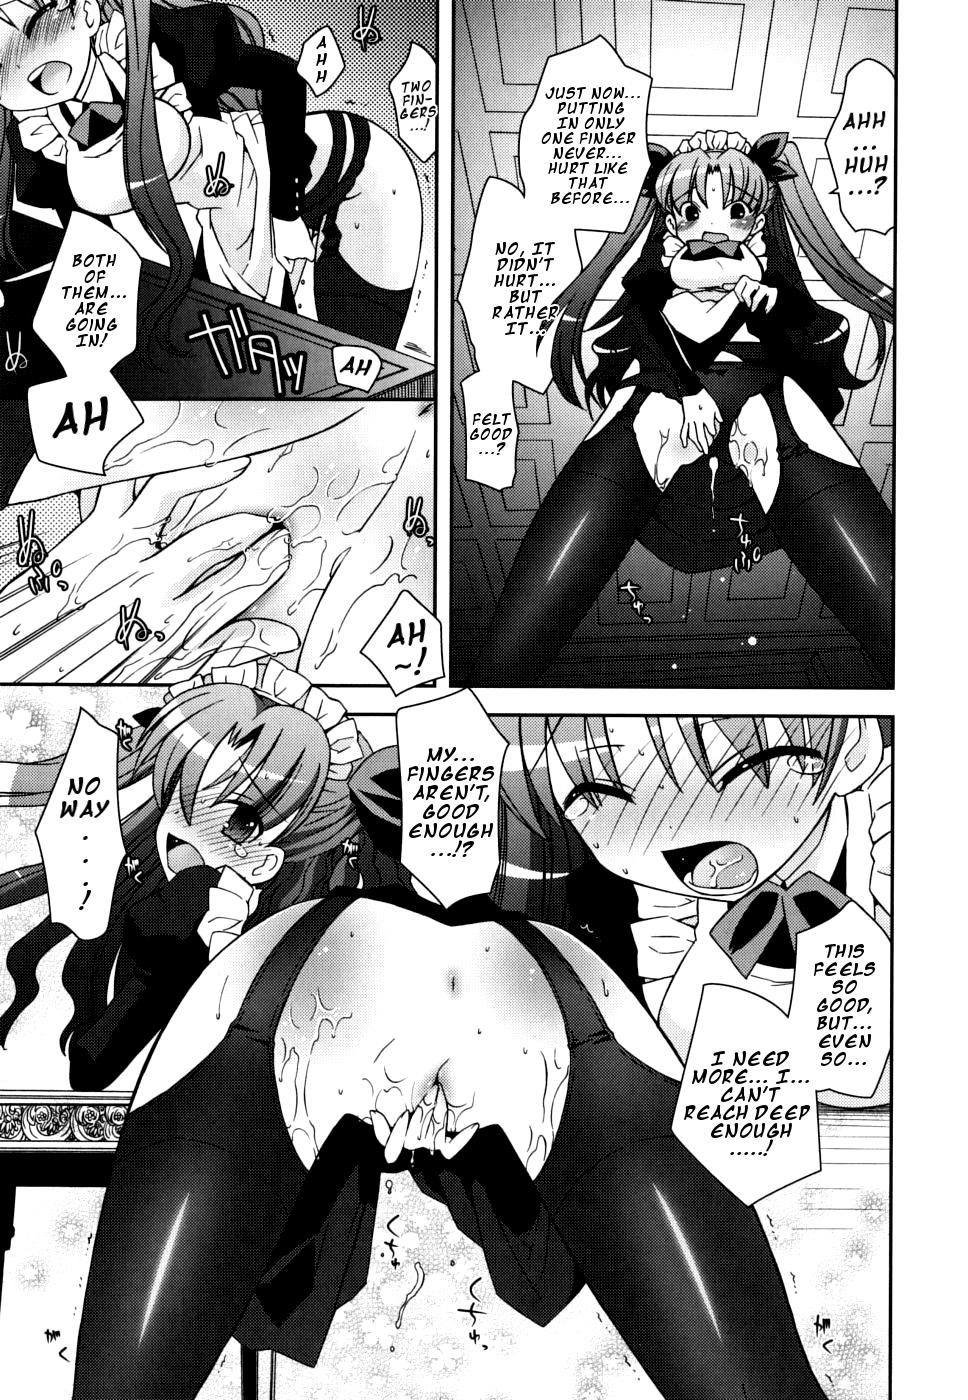 Spying White Brim - Fate stay night Pure18 - Page 9